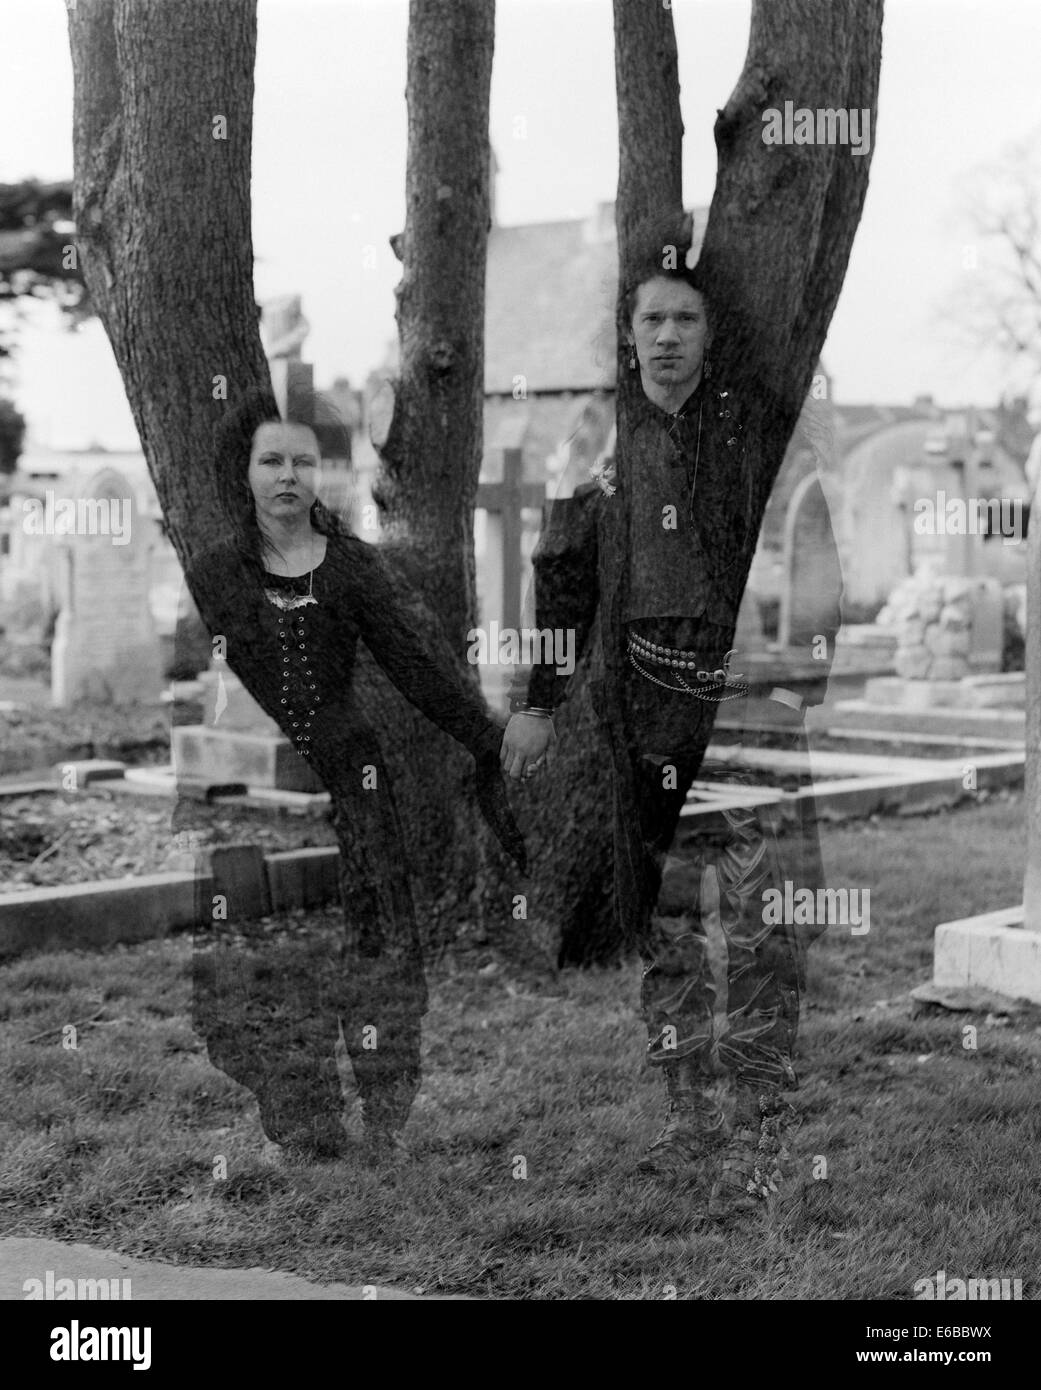 young fashionable goths dressed in black in a church graveyard portsmouth uk Stock Photo